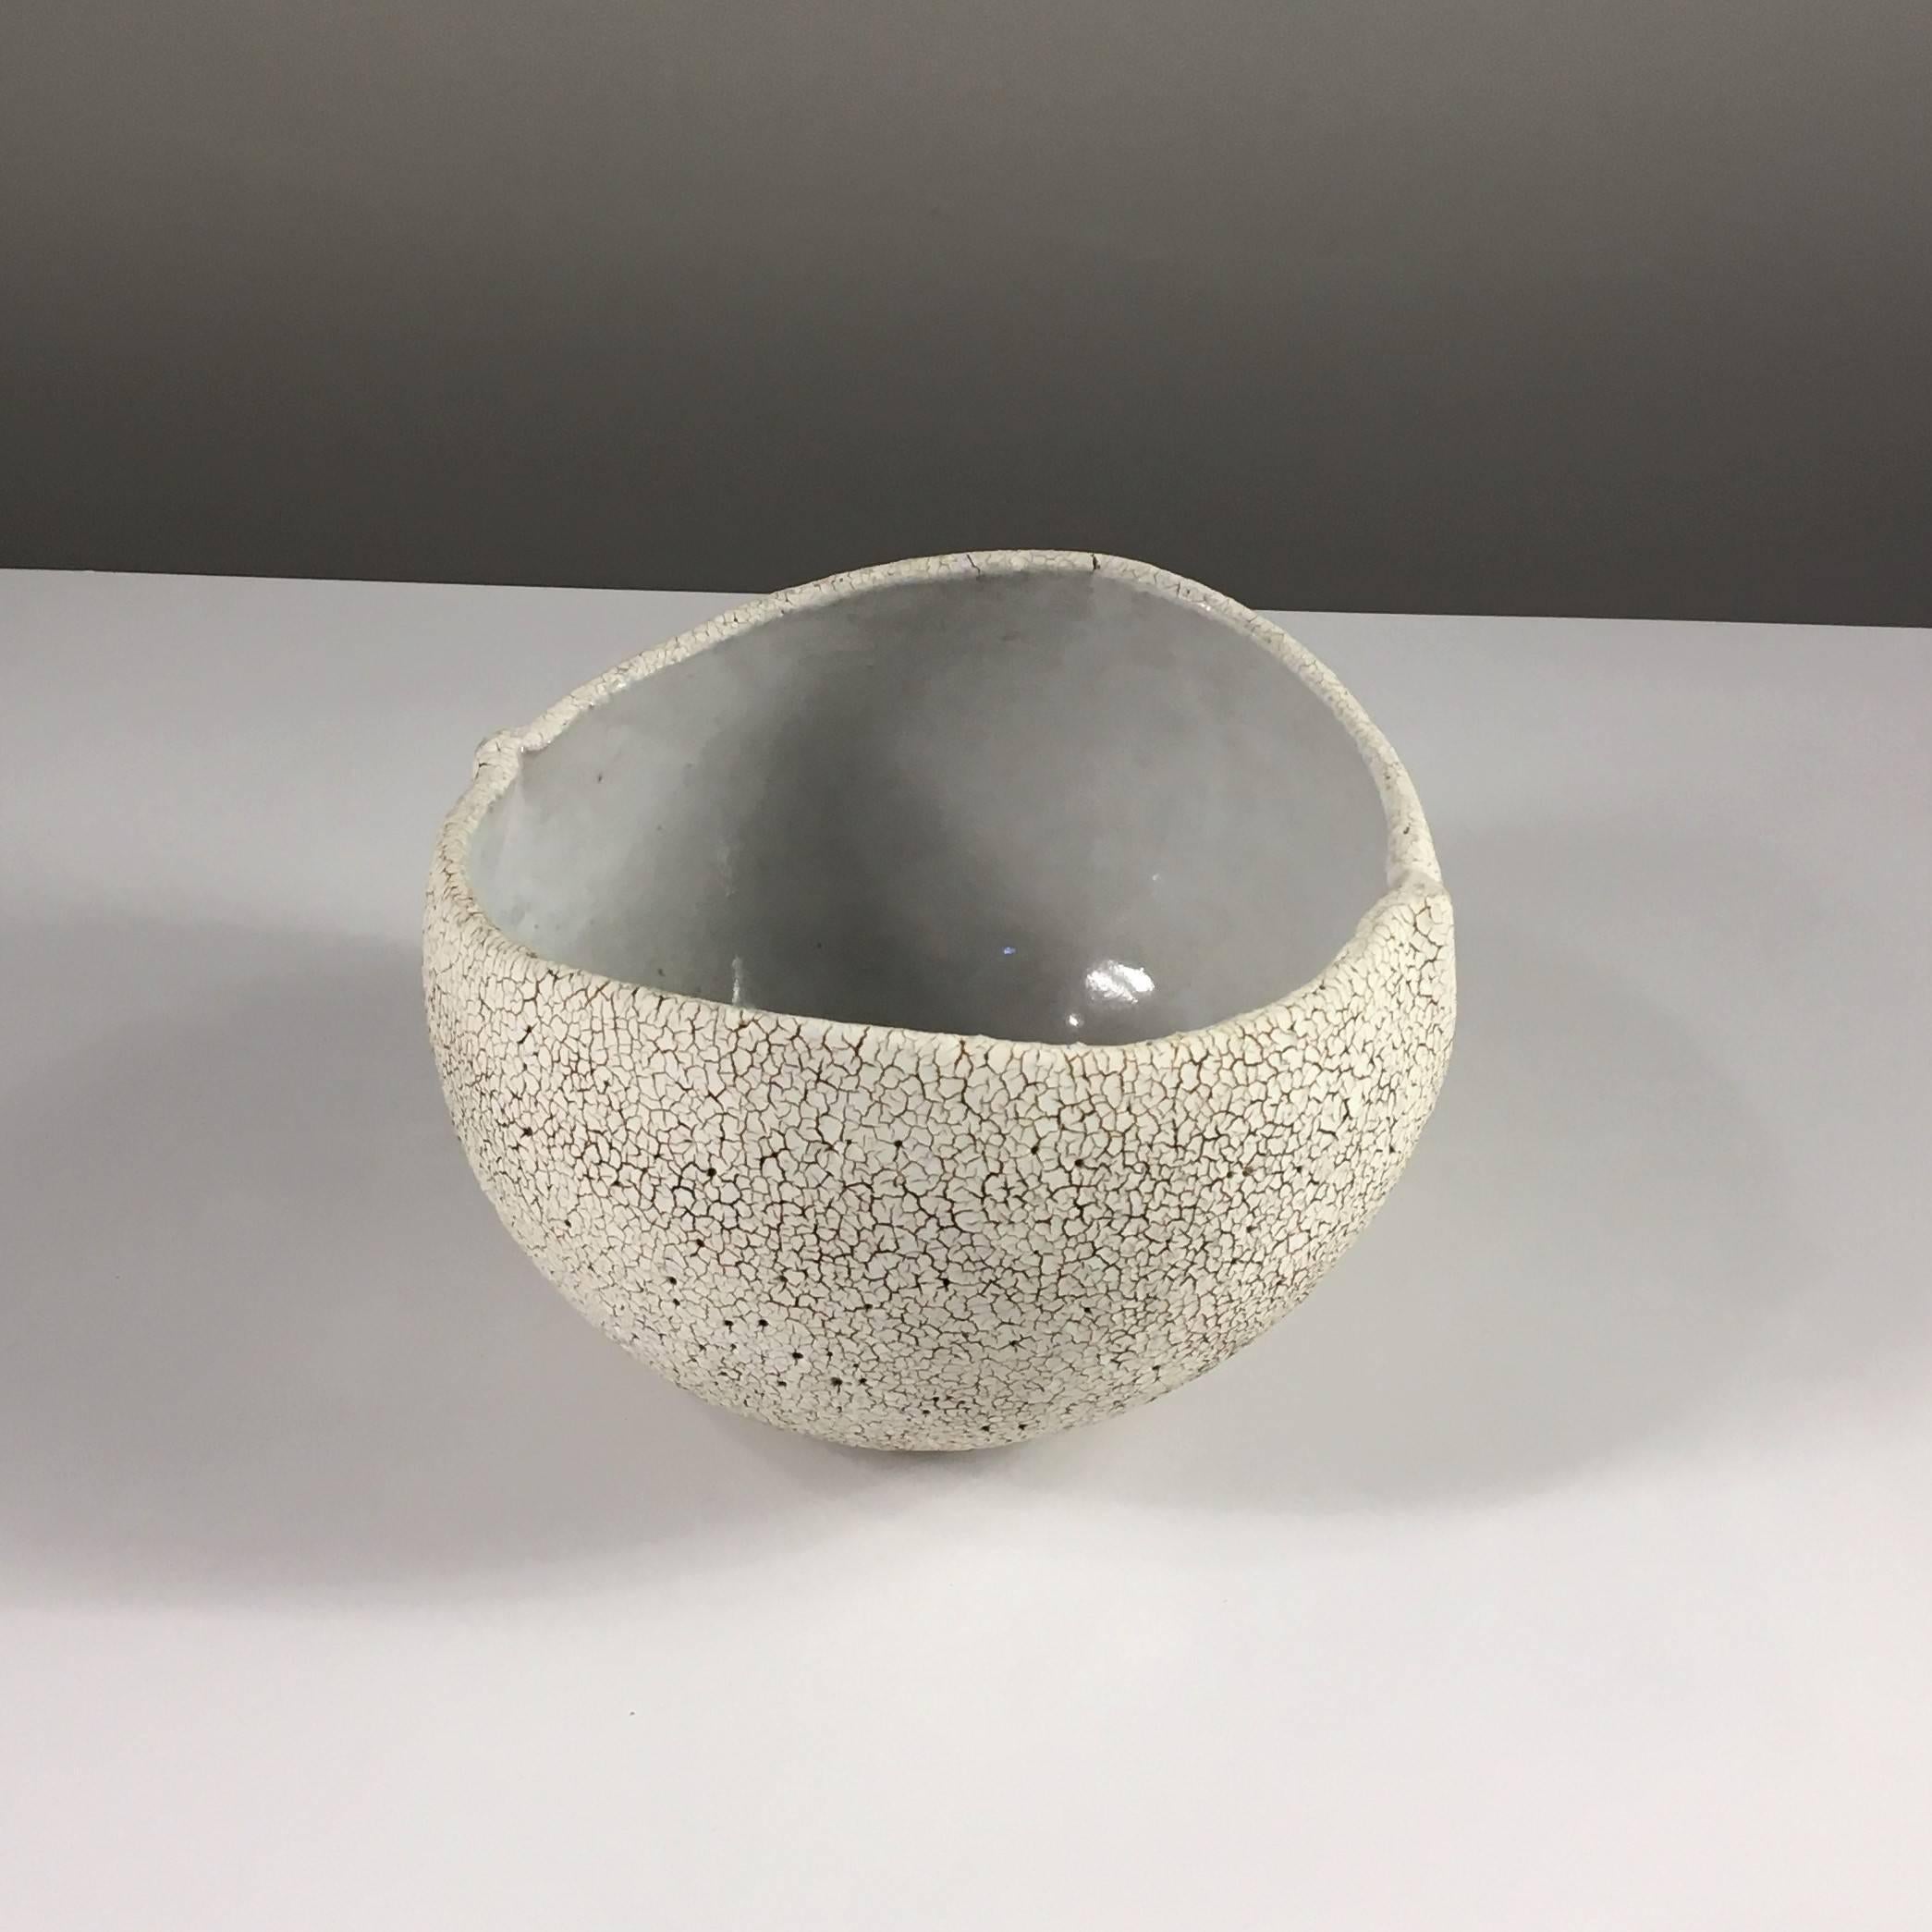 Contemporary ceramic artist Yumiko Kuga's glazed stoneware round bowl no. 171 is part of her Crackle series. All of the pieces in this series are hand-built and 100% handmade so they are one-of-a-kind and thus vary slightly from one another. All